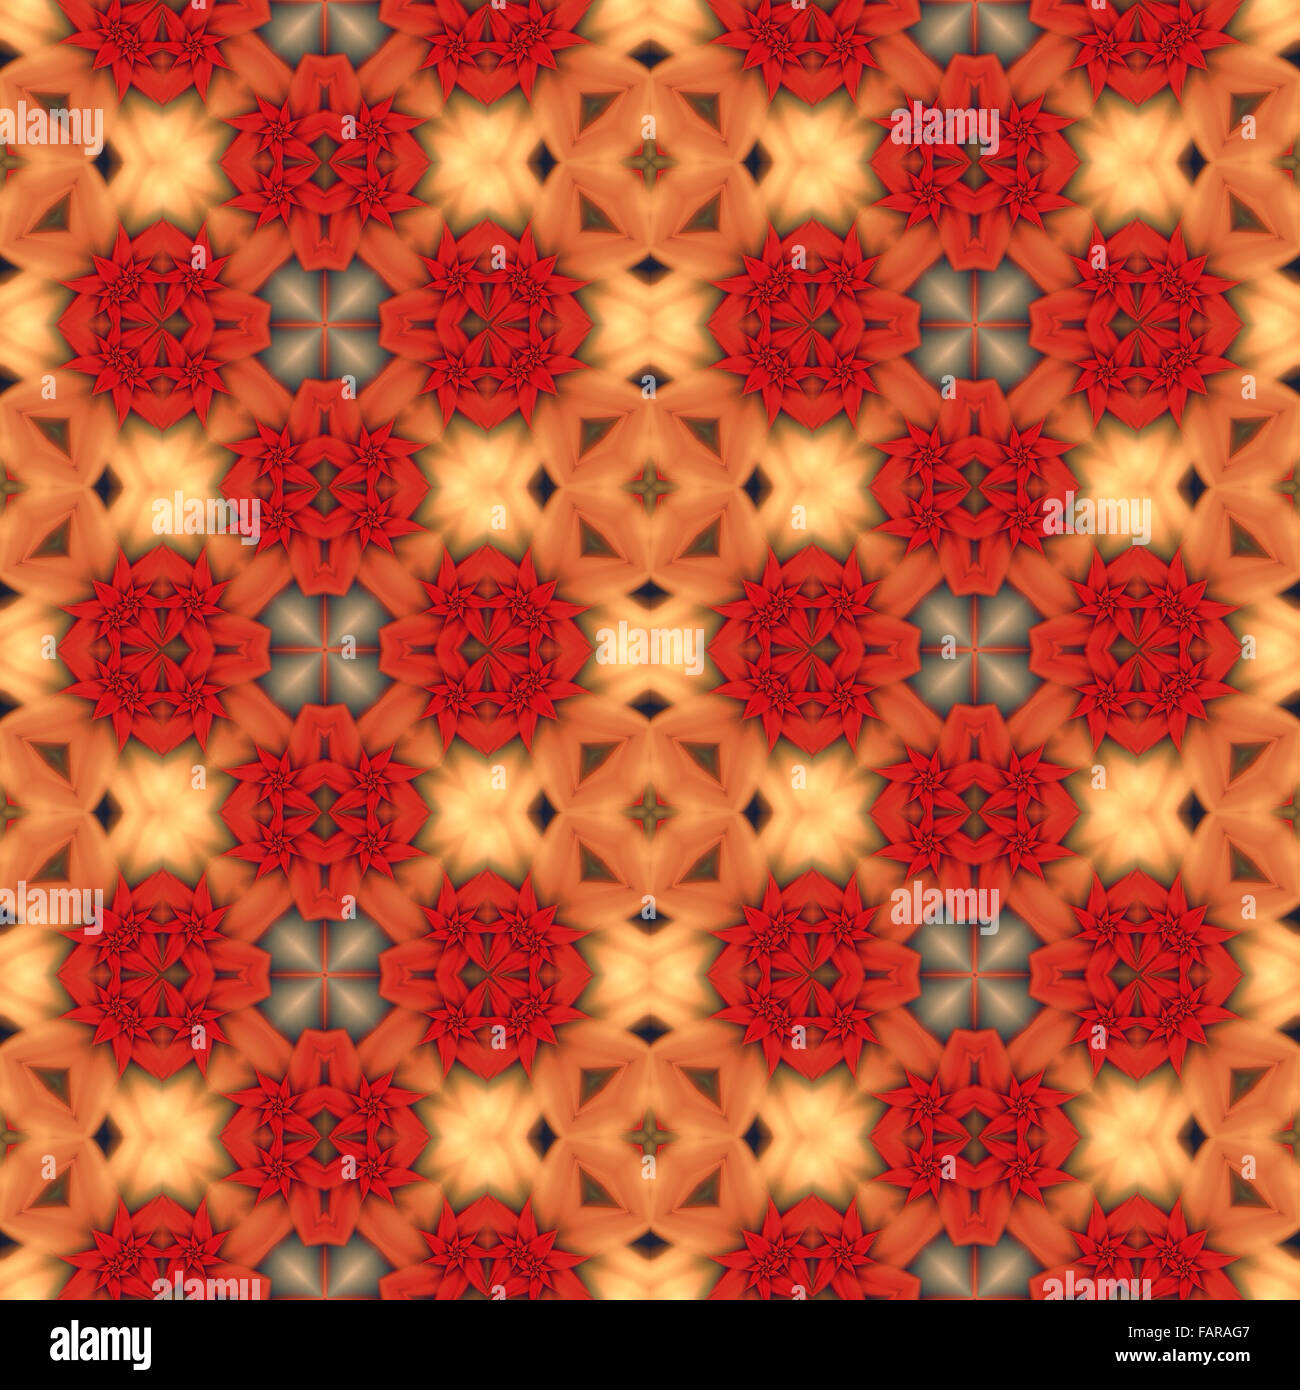 Seamless red flower fractal background or pattern Stock Photo